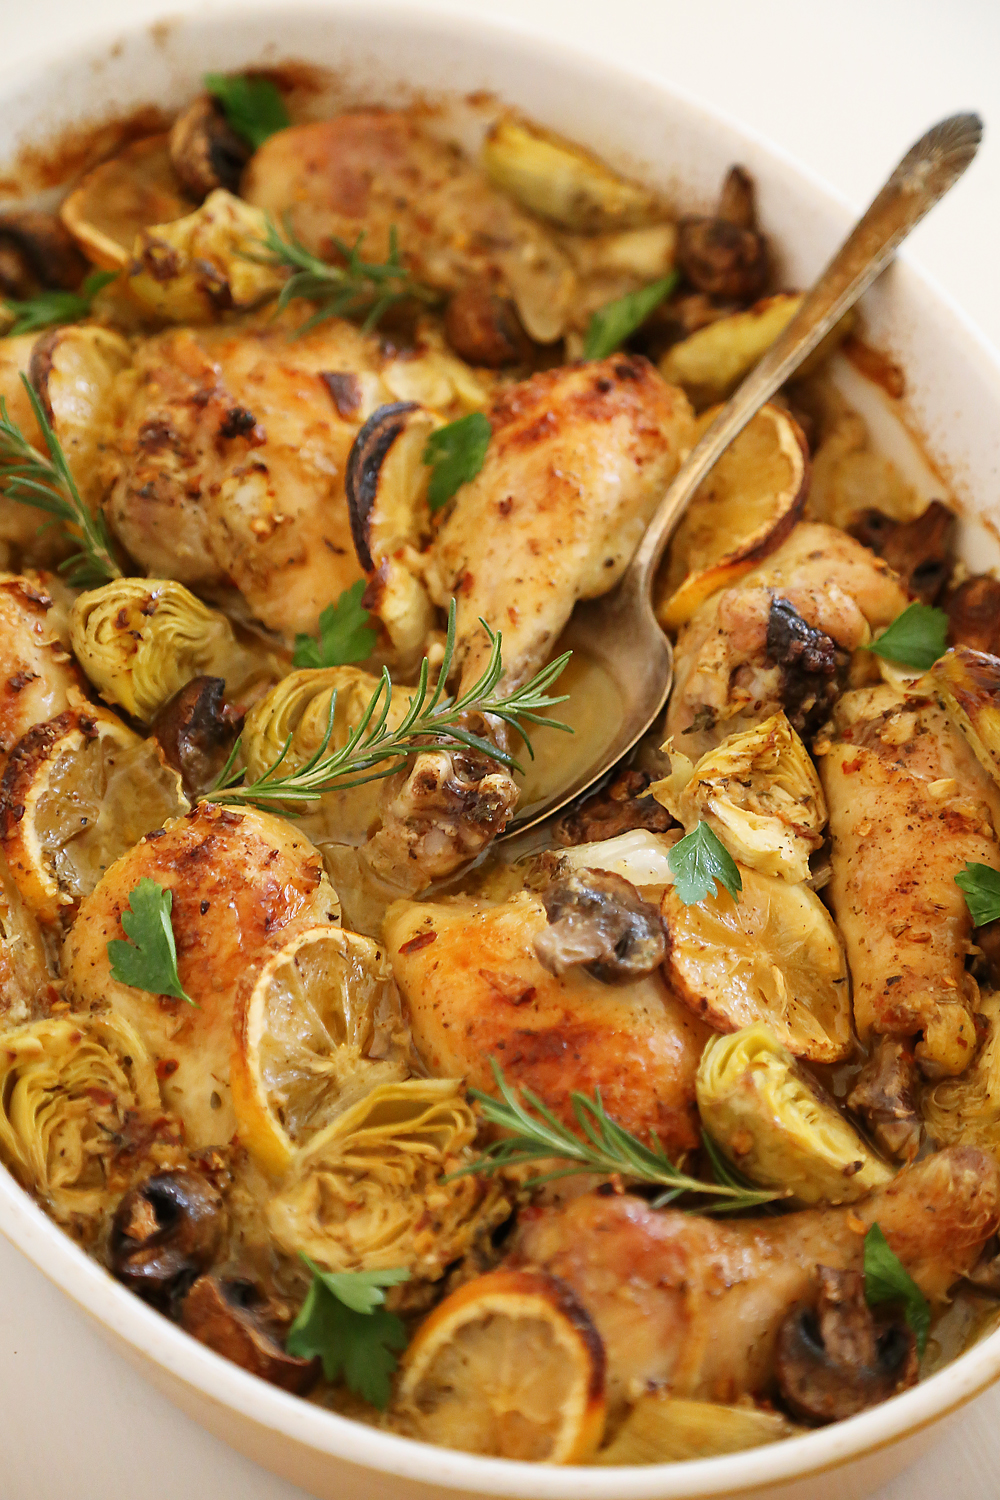 Lemon and Artichoke Oven Roasted Chicken - Crispy, tender lemon-roasted chicken with artichokes and mushrooms makes an easy, elegant dinner! Thecomfortofcooking.com